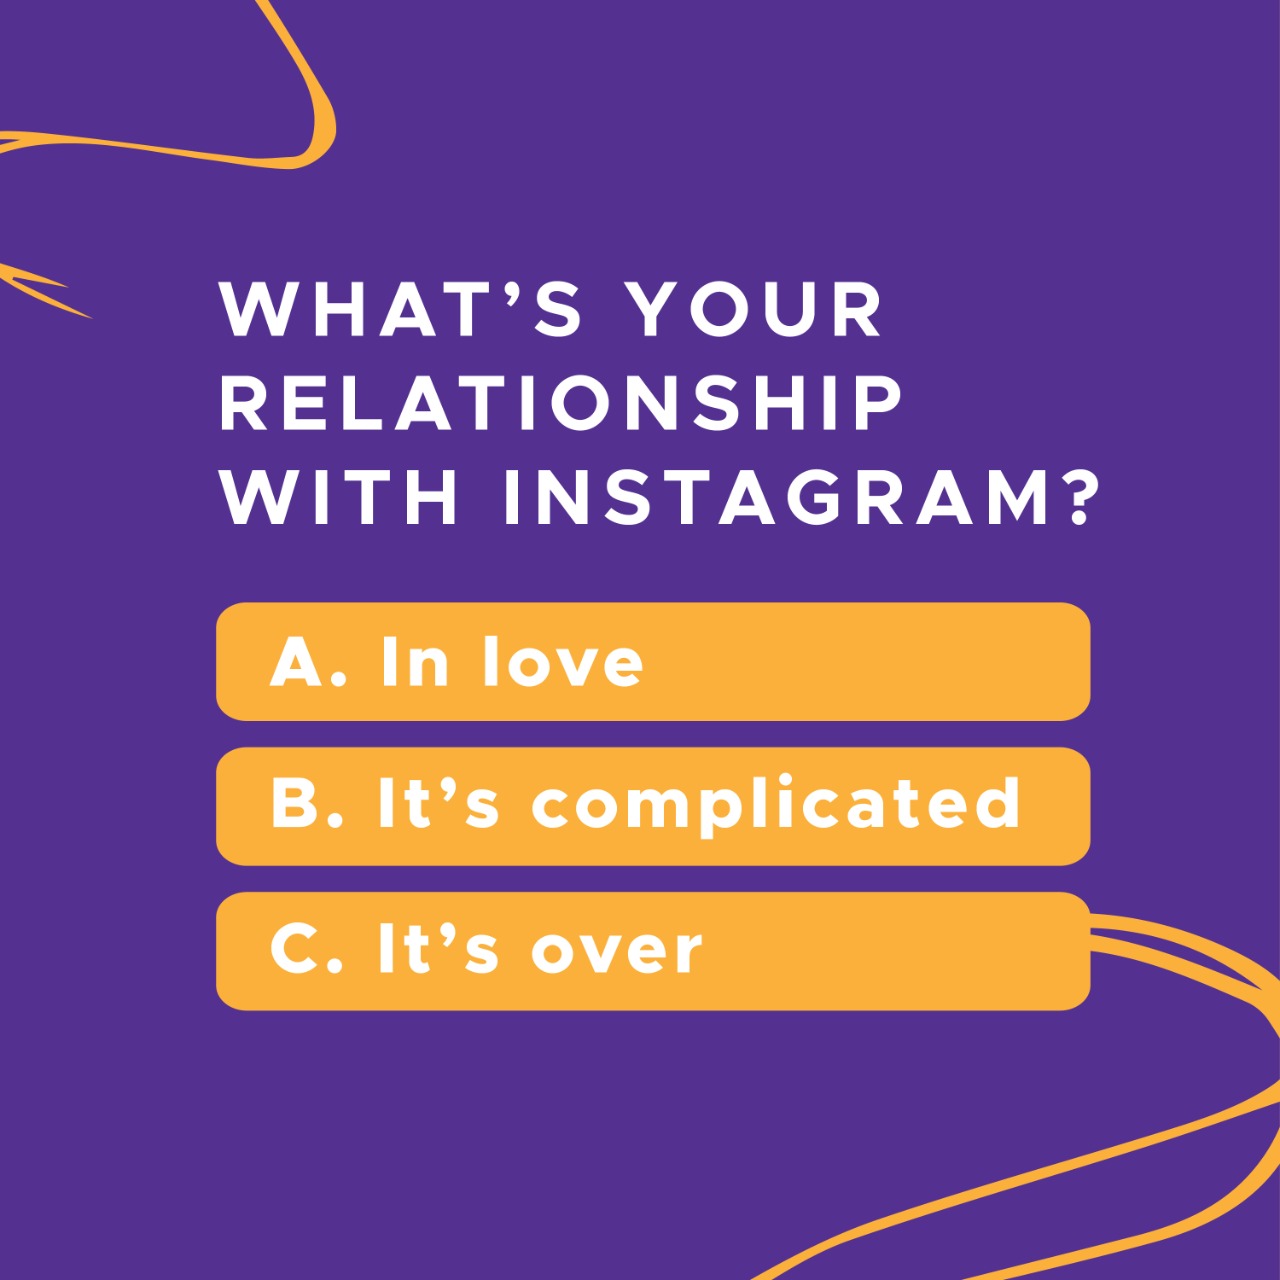 What's Your Relationship Status? Do Tell Us In The Comment's Below